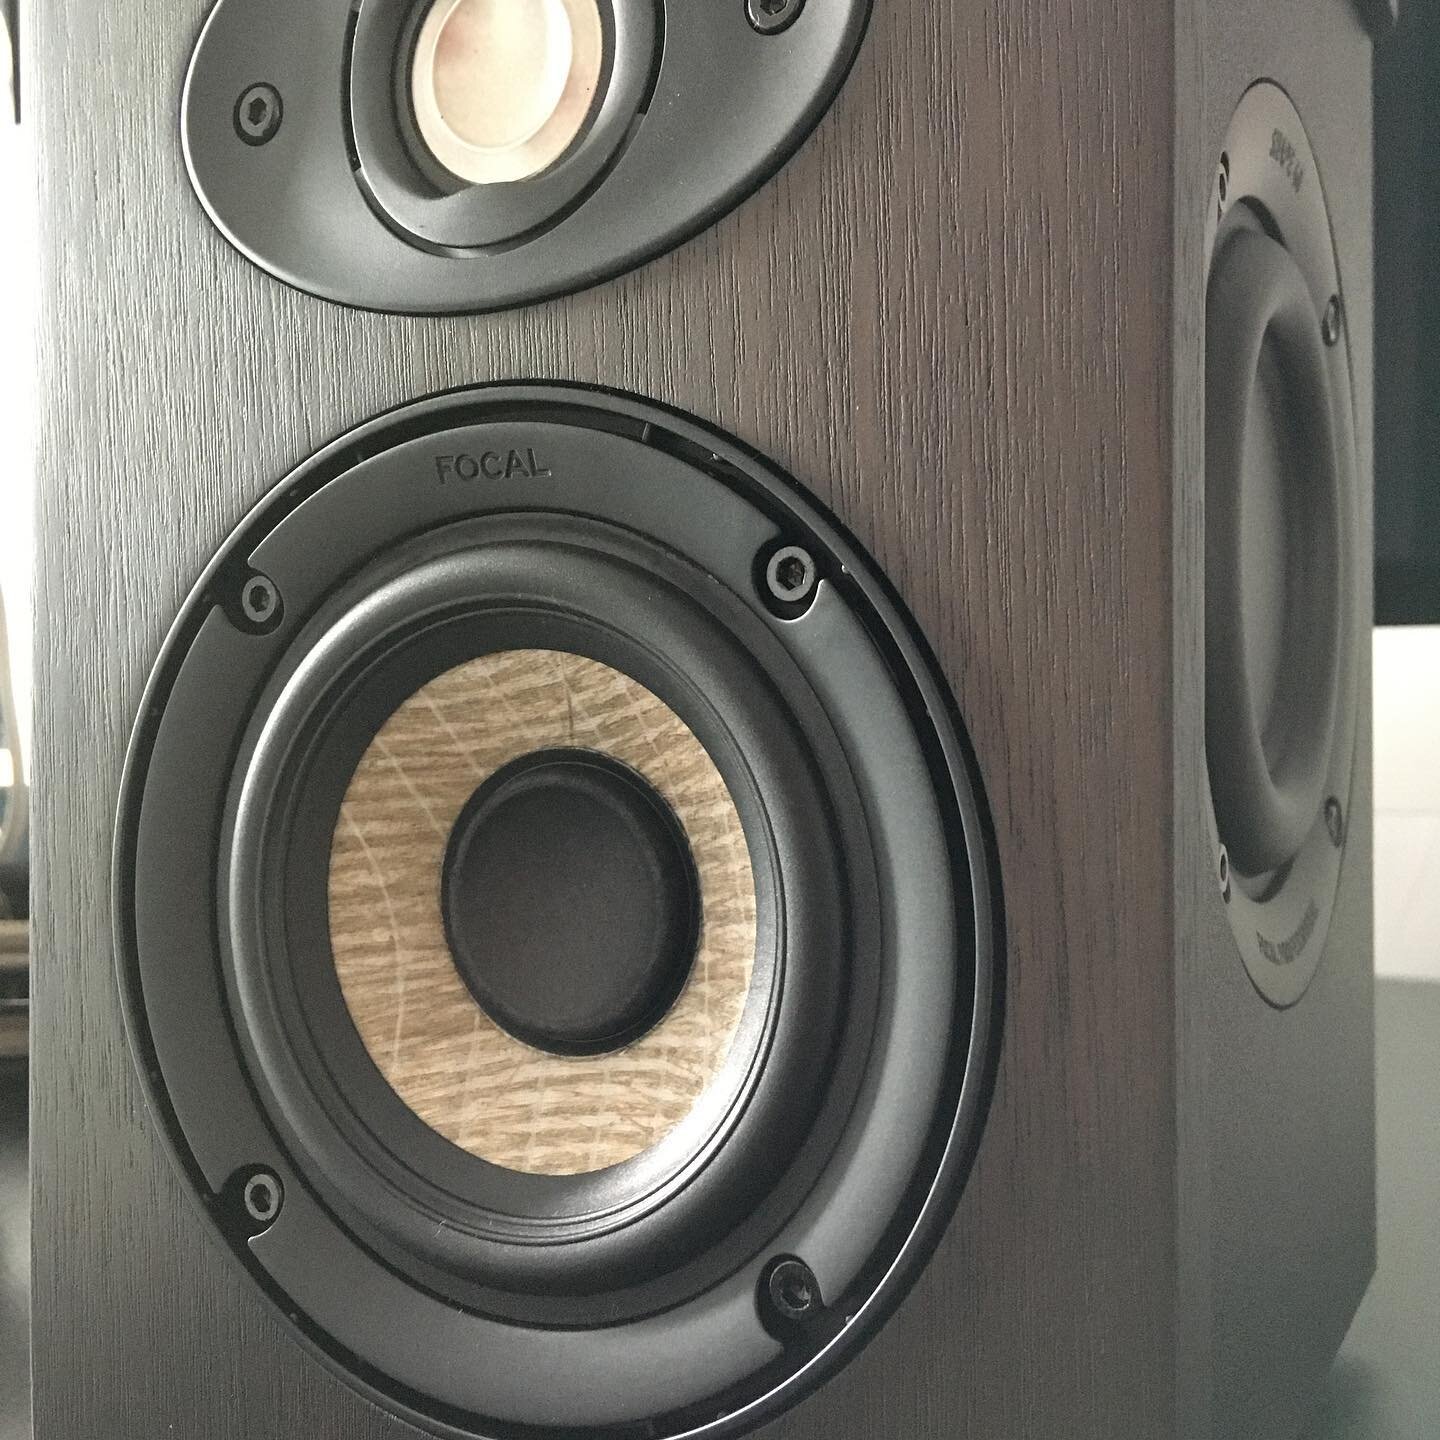 Brand new surround set of Focal Shape speakers just landed at Black Edge Sound Studios. Breaking them in with a bit of #toolmusic - V. Impressed with the clarity. #focalofficial #focal_uk